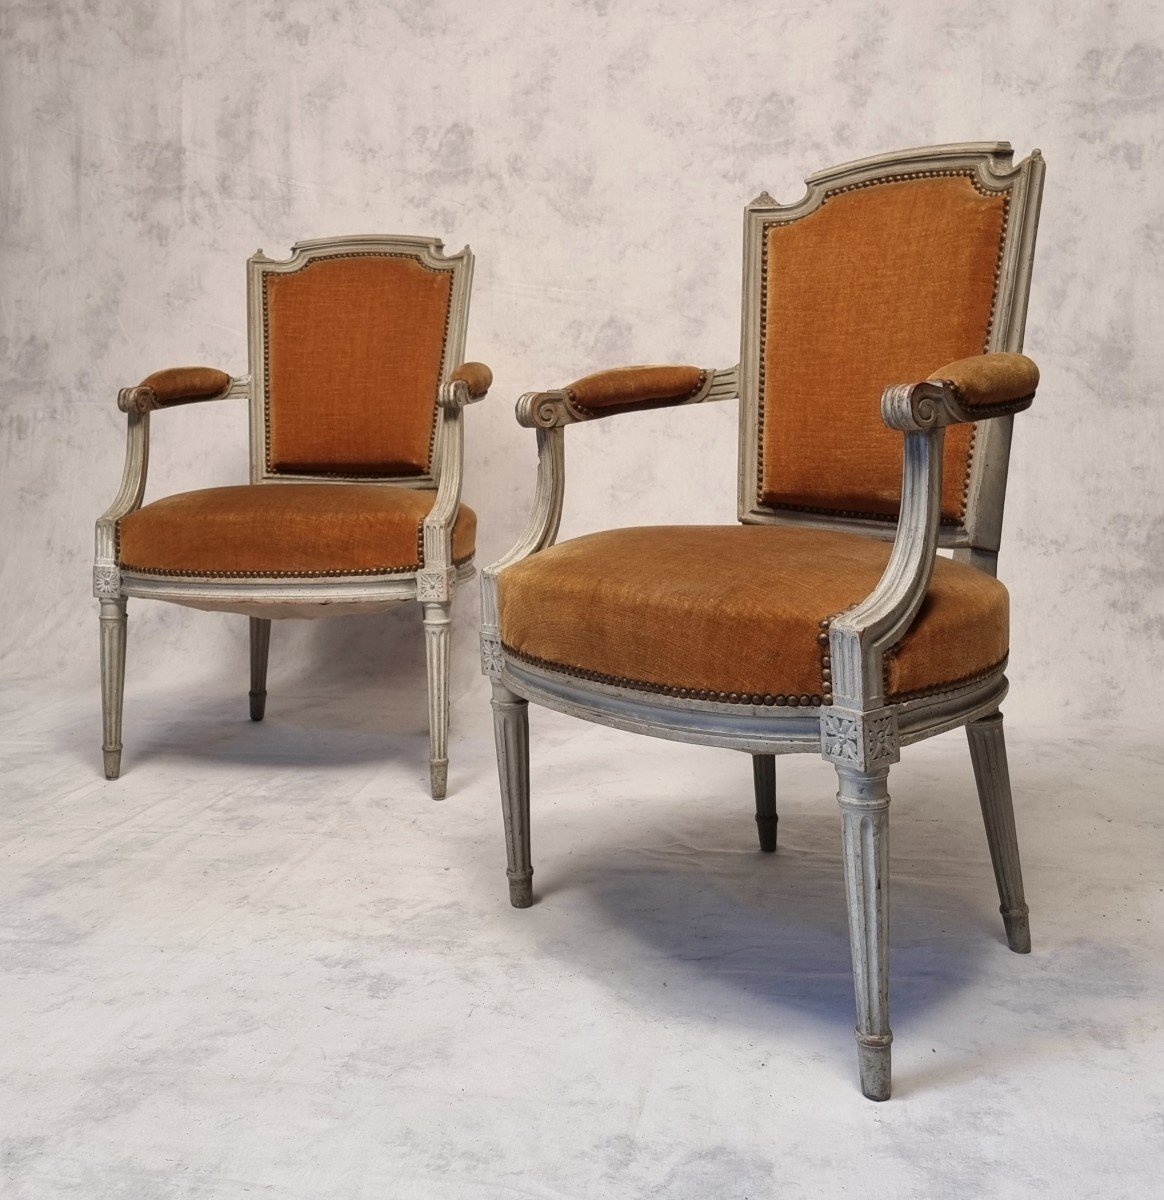 Pair Of Louis XVI Armchairs - Lacquered Wood - 18th